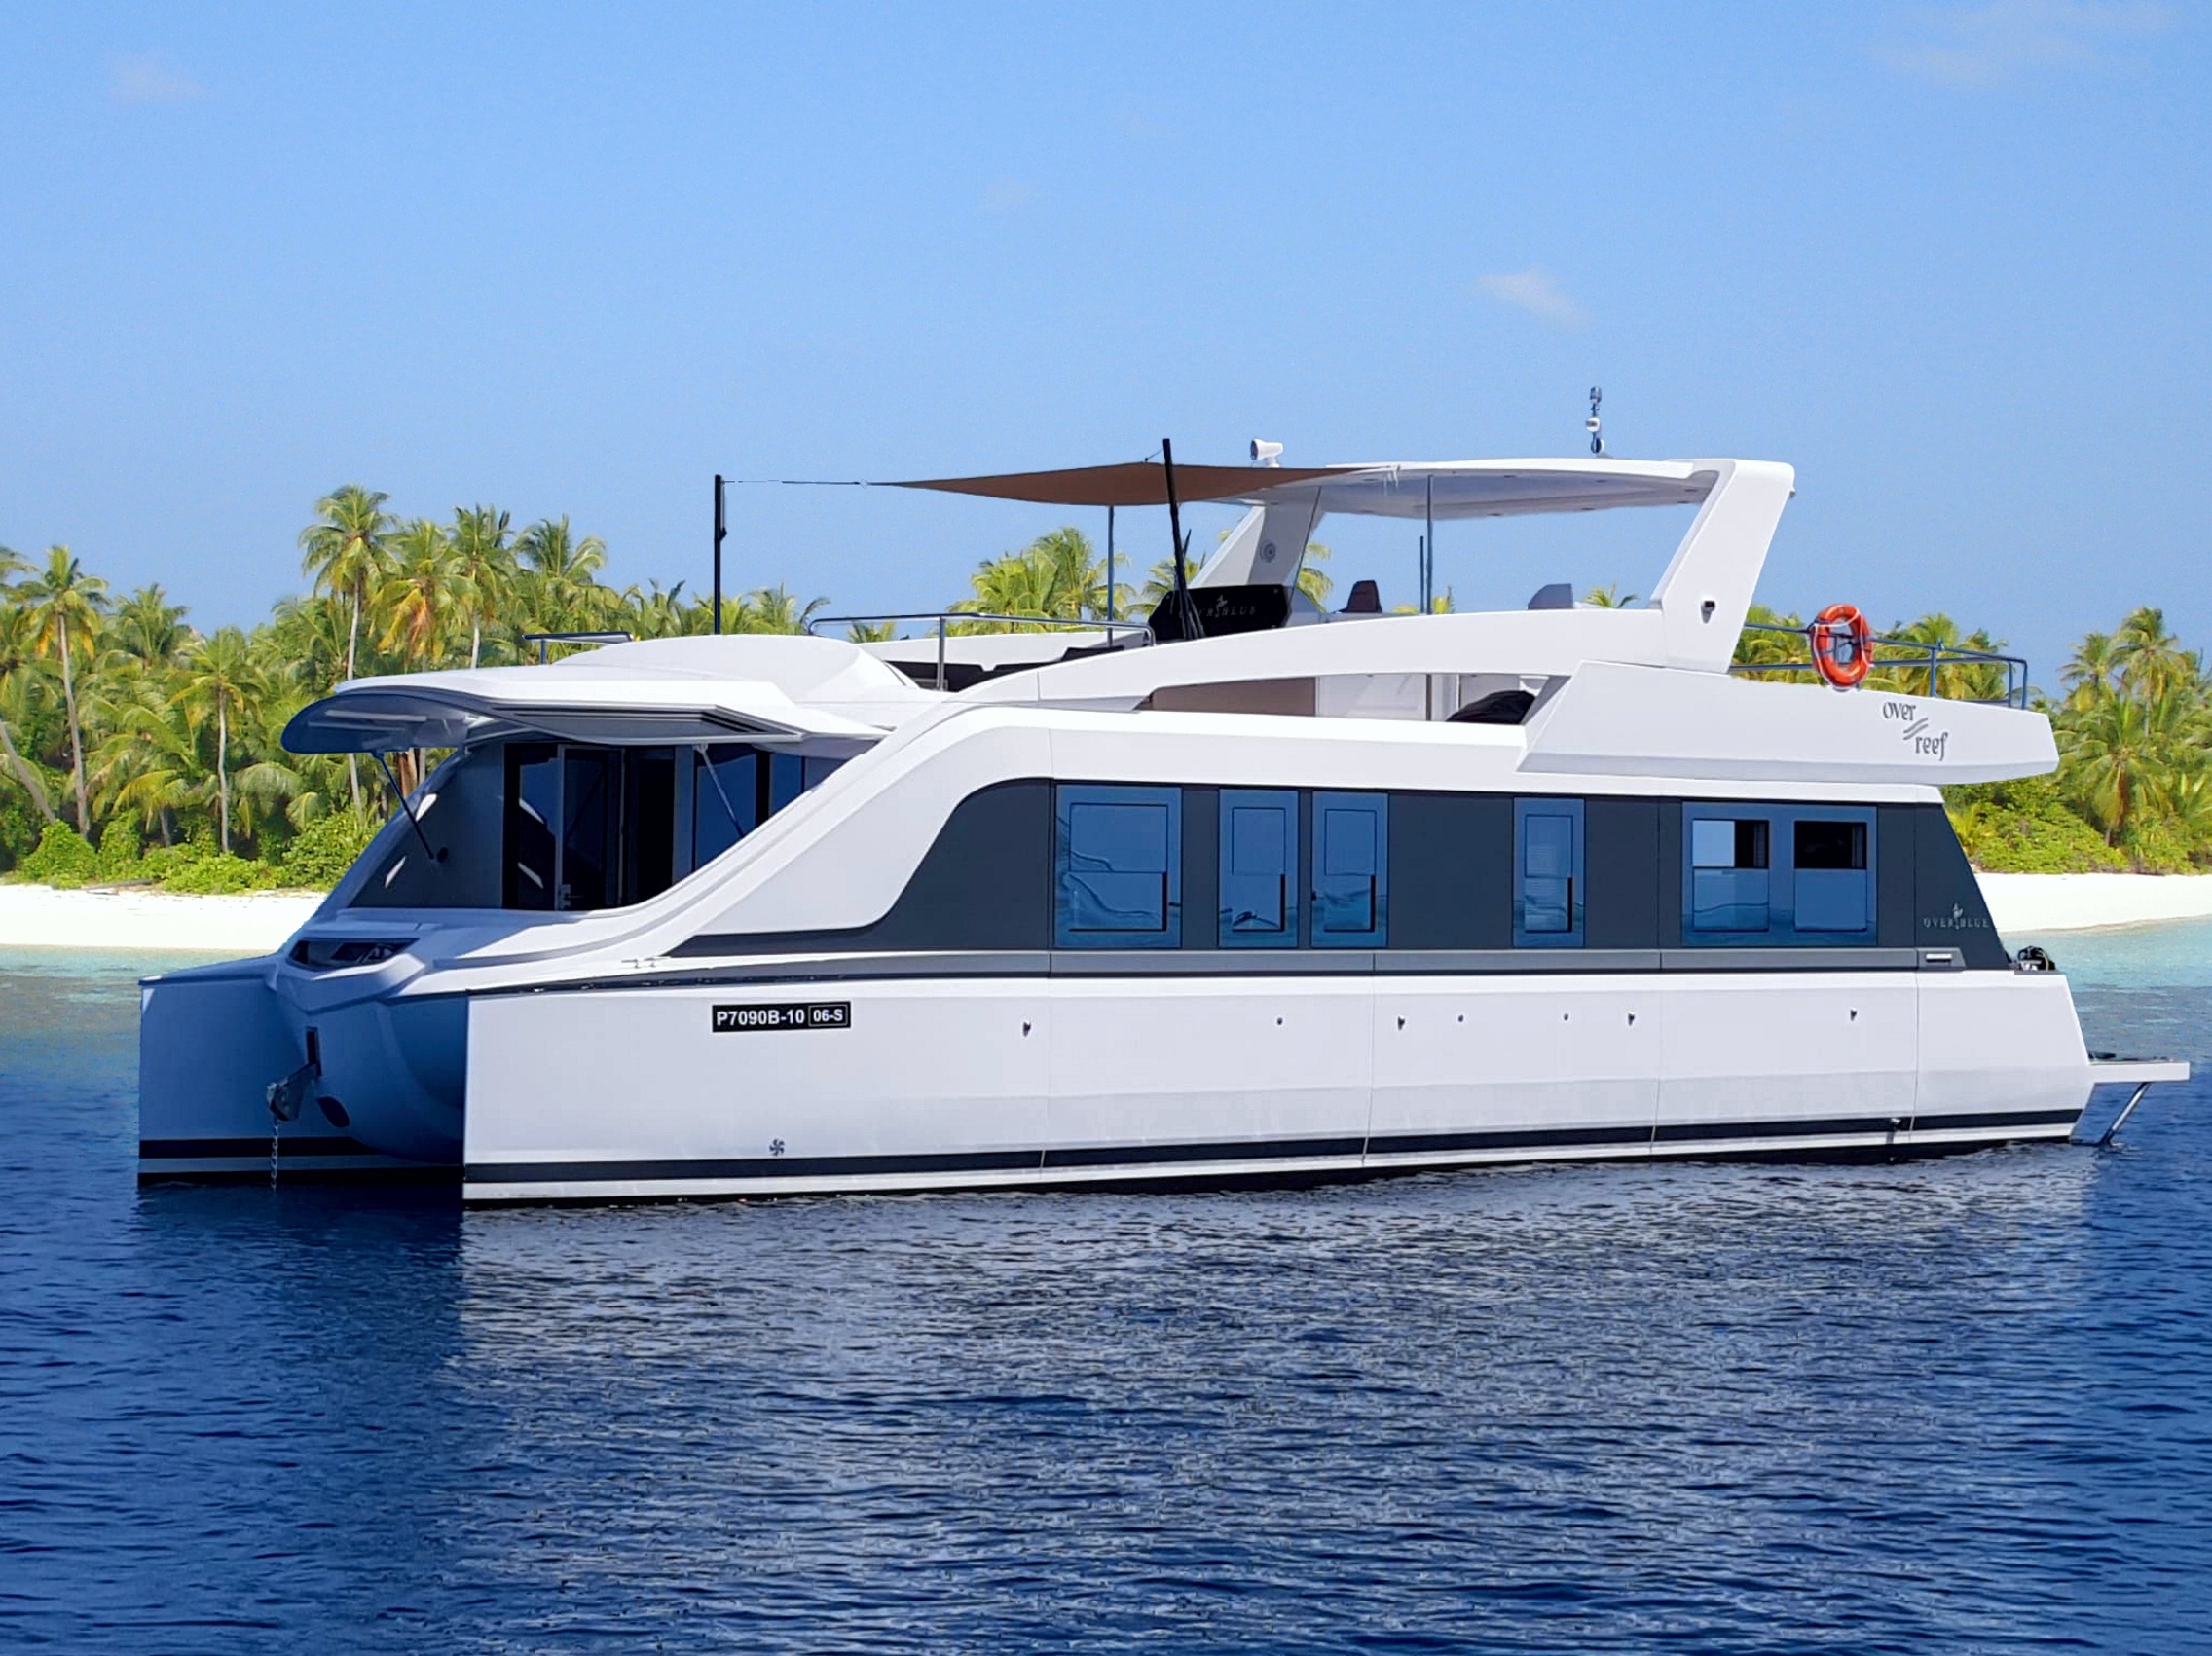 Over Reef - Luxury yacht charter Maldives & Boat hire in Maldives Malé Malé 1